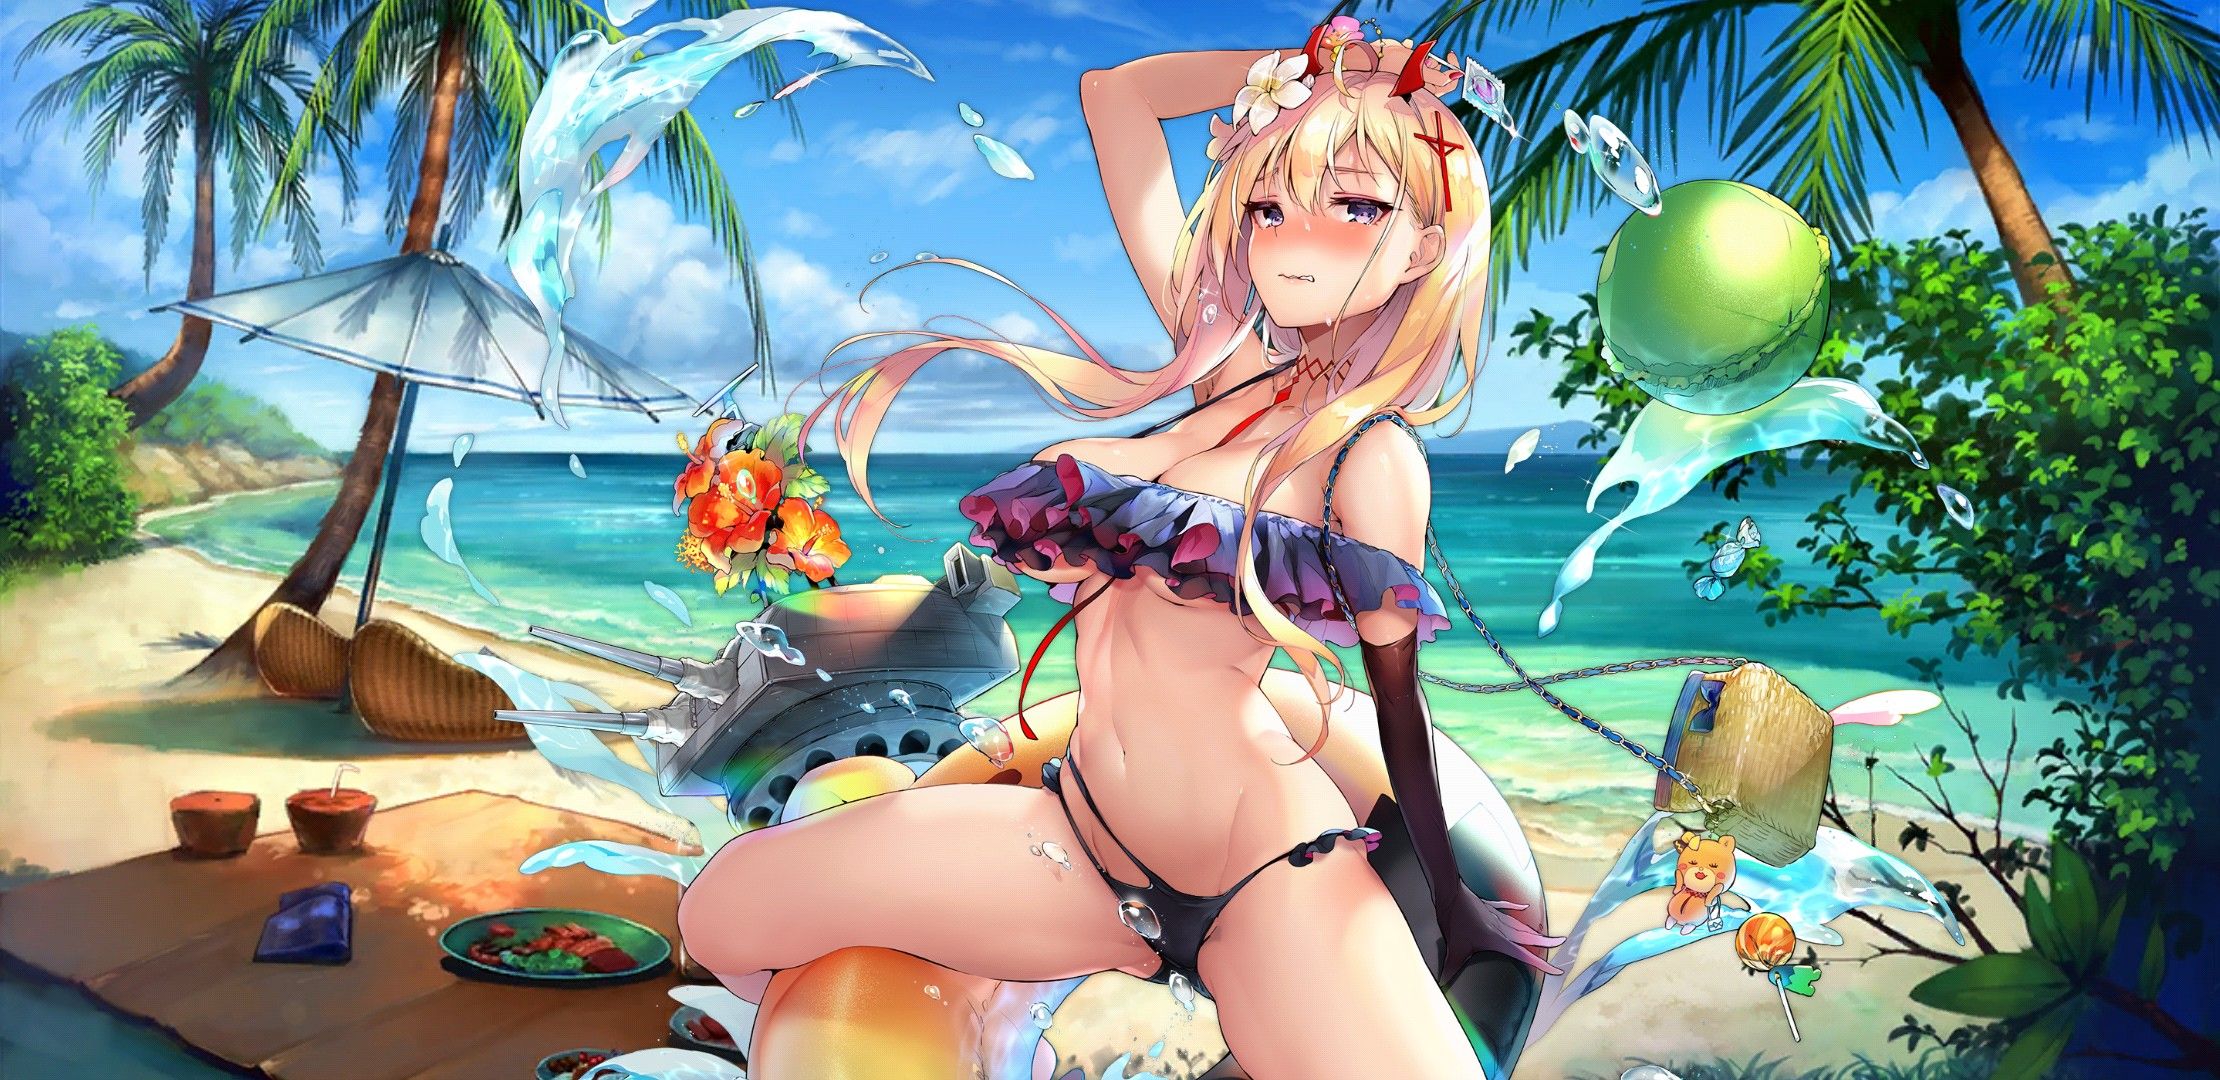 【There is an image】 Smartphone that urges charging with erotic swimsuits is malicious 18